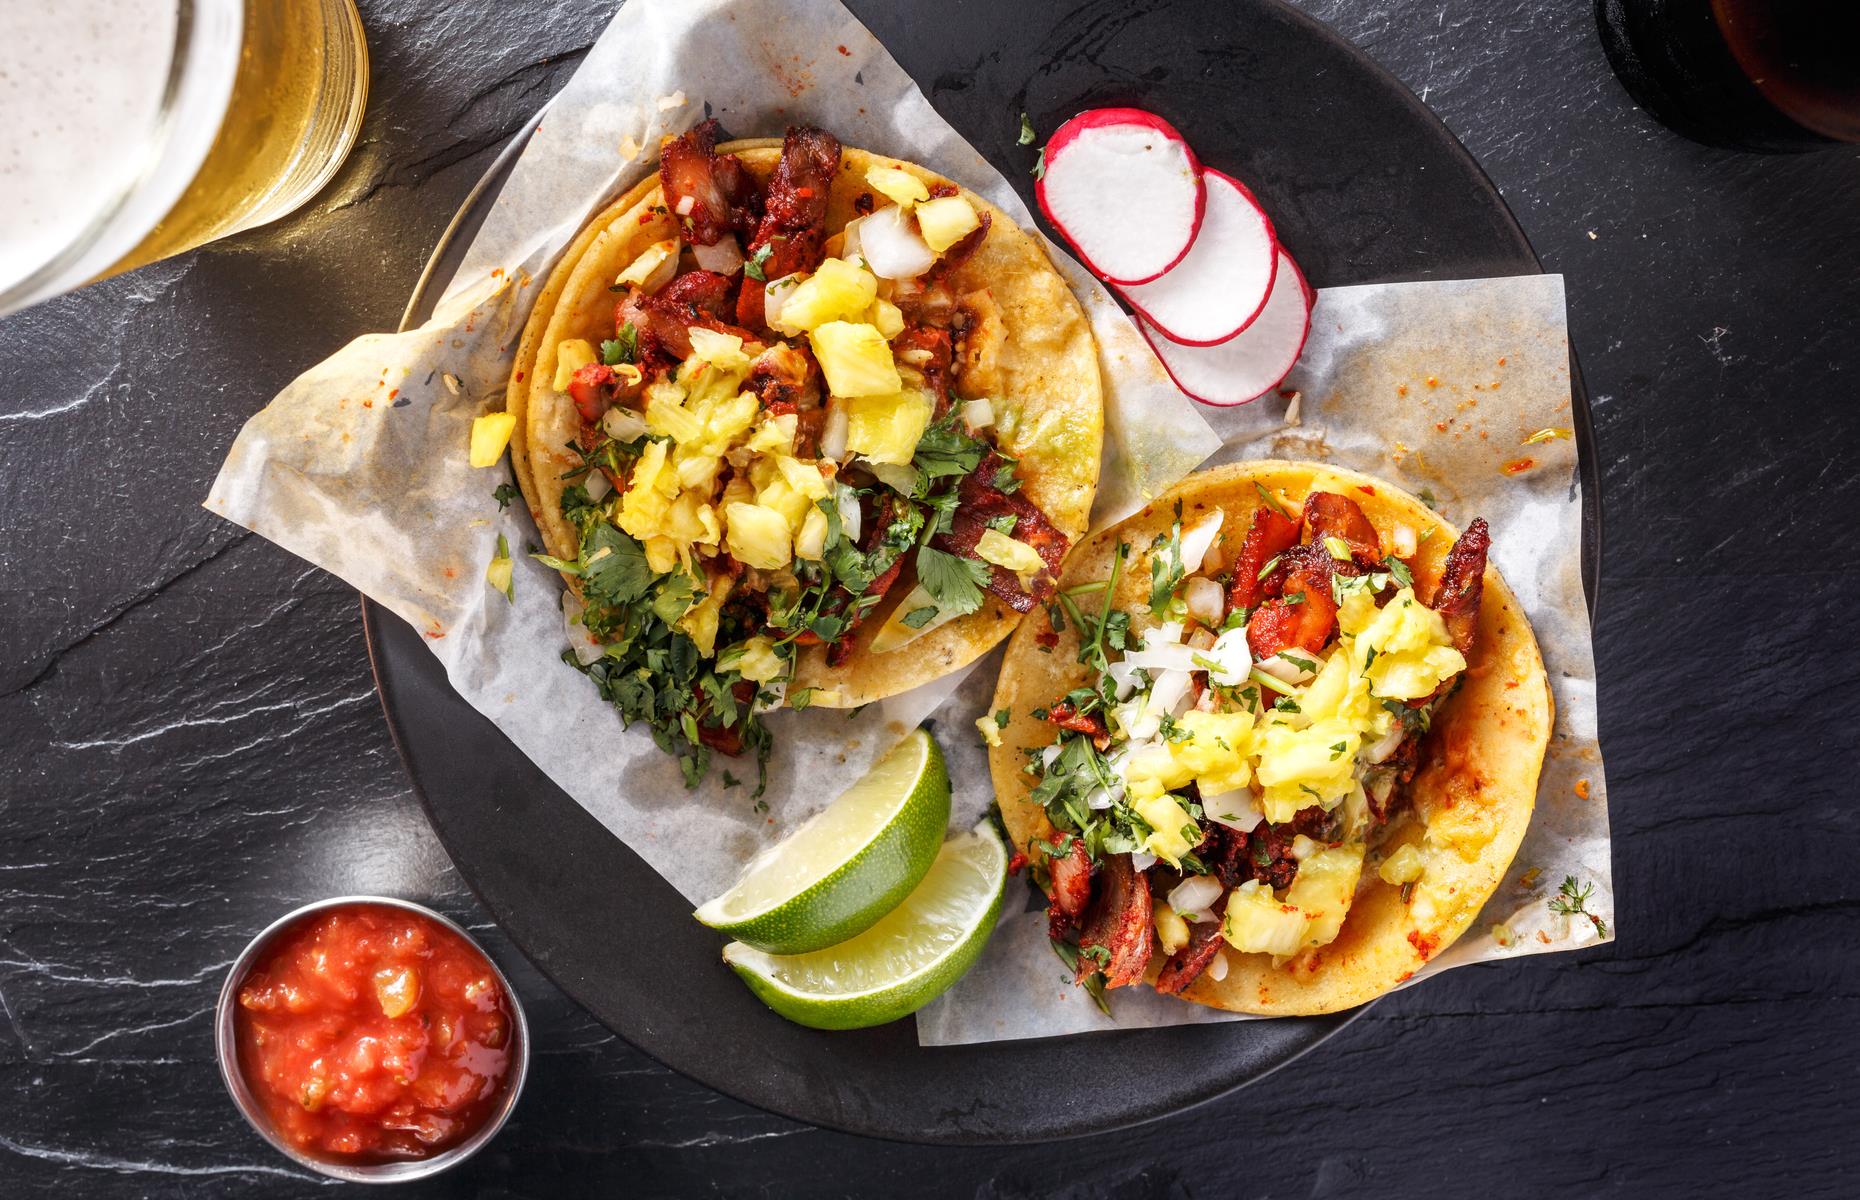 Terrific taco recipes that are quick and easy